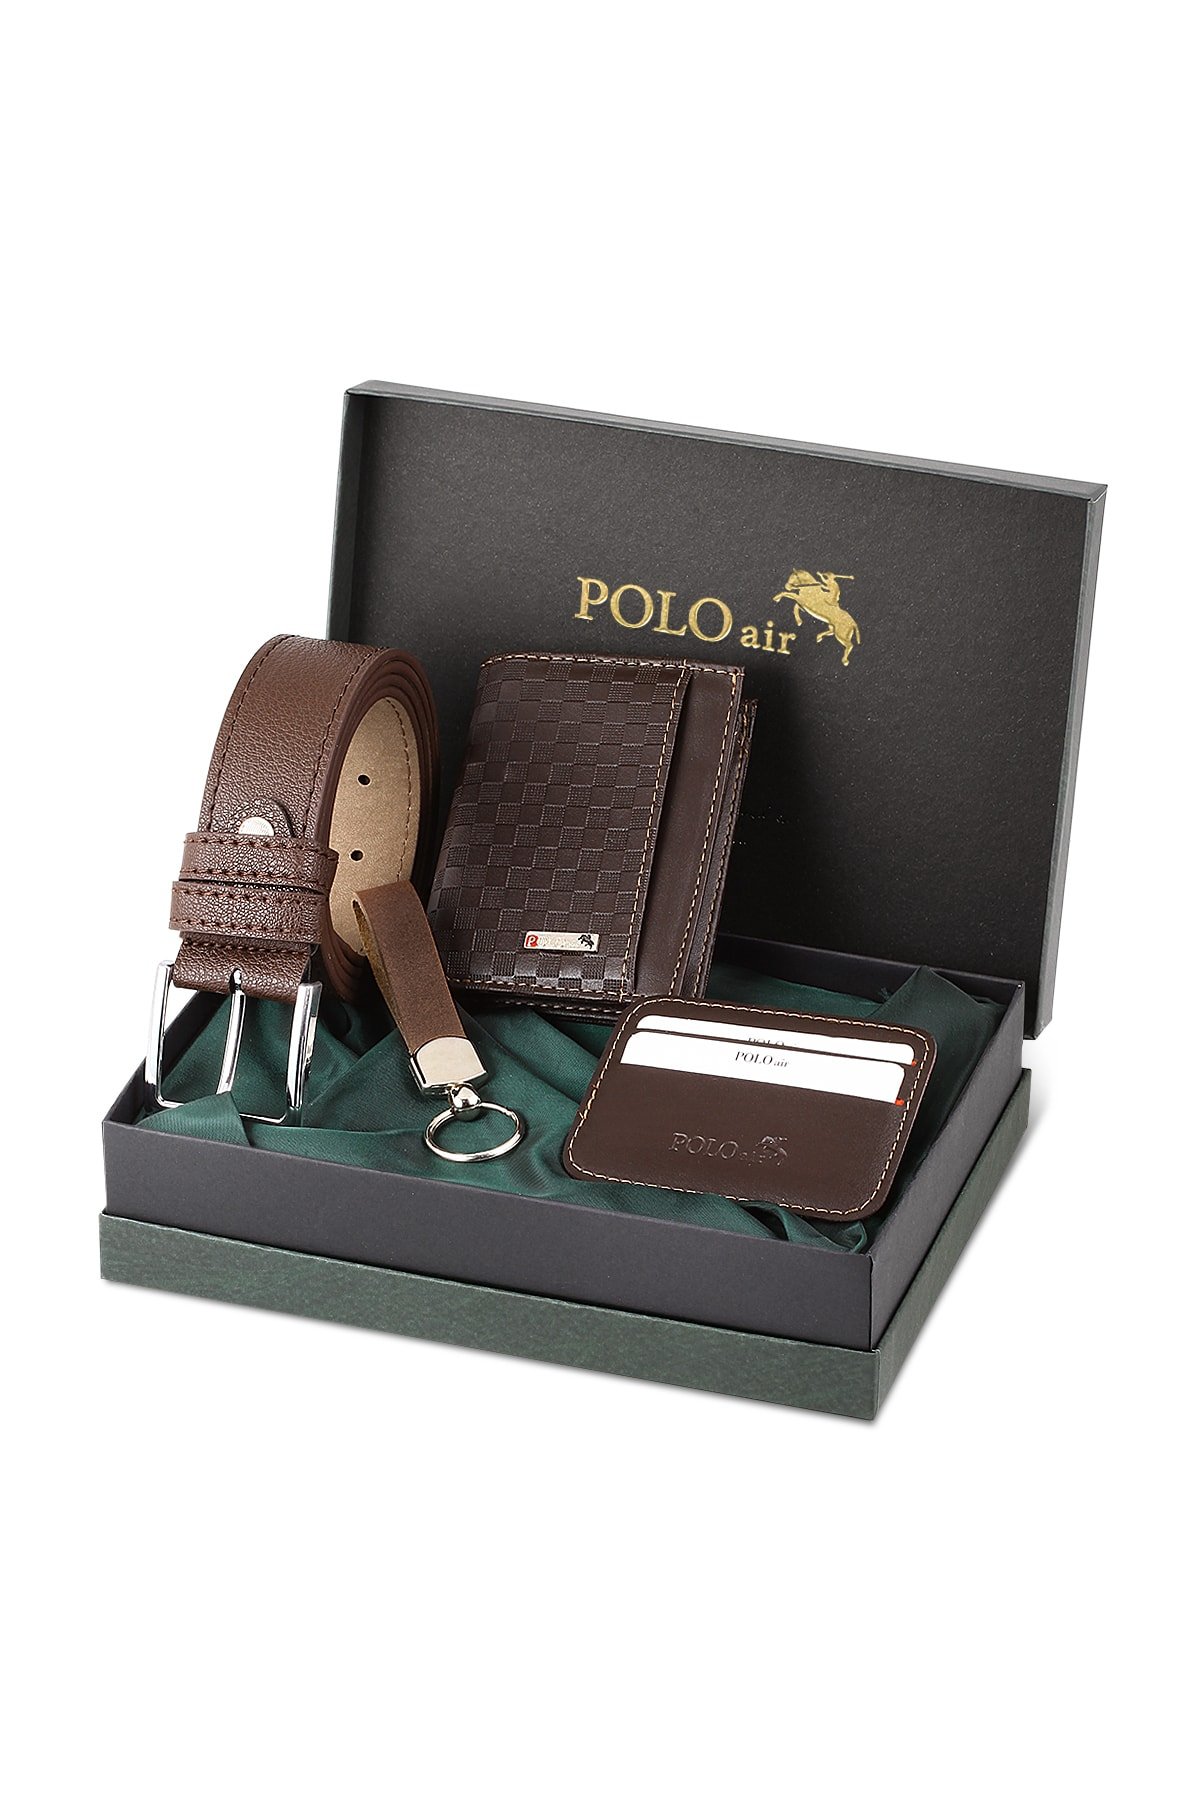 Polo Air Checkerboard Pattern Wallet It Makes It Own Card Holder Belt Keychain Combine Combination Brown Set.